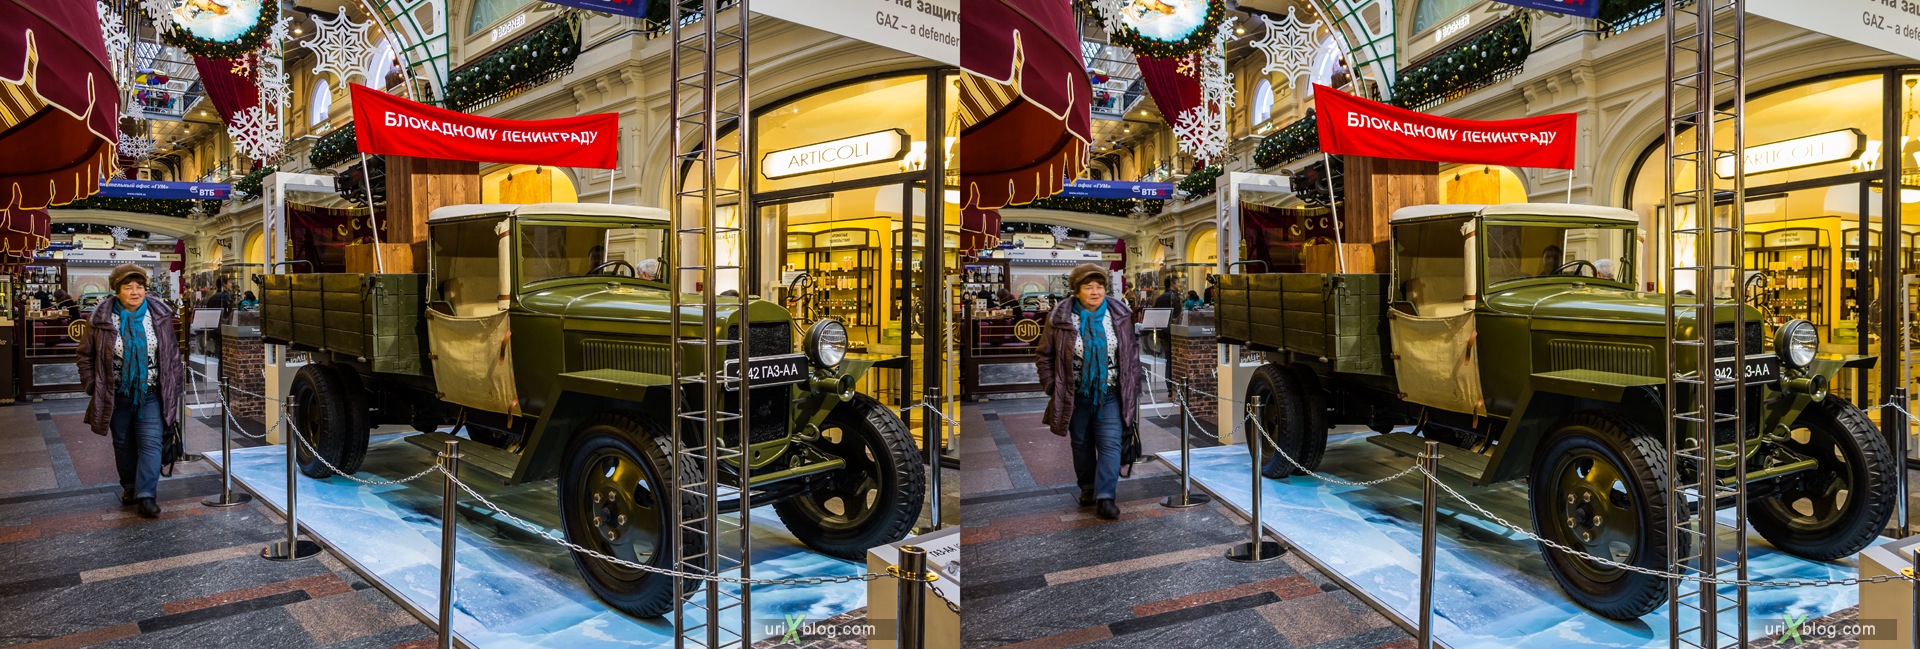 2013, Moscow, Russia, GAZ-AA, GUM, old, automobile, vehicle, exhibition, shop, mall, 3D, stereo pair, cross-eyed, crossview, cross view stereo pair, stereoscopic